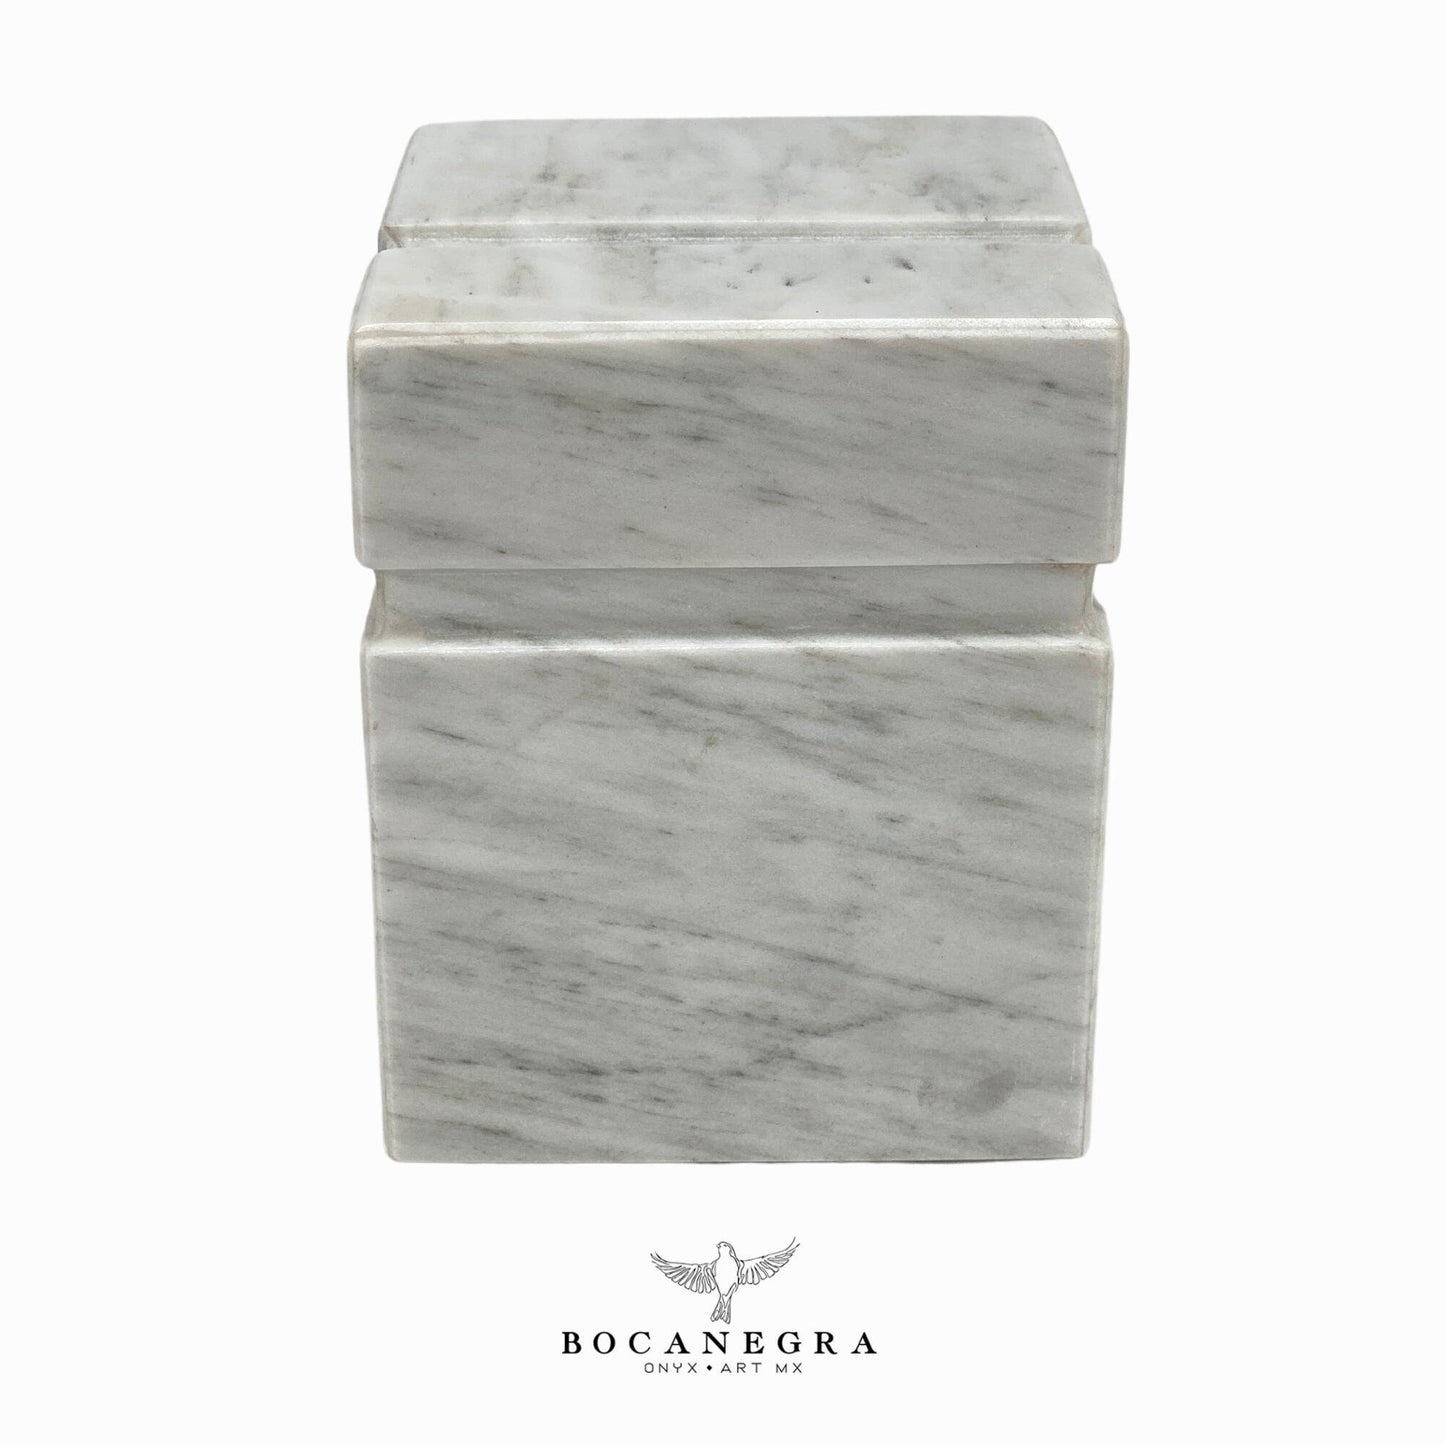 White Marble Cremation Urn for Human or pet Ashes